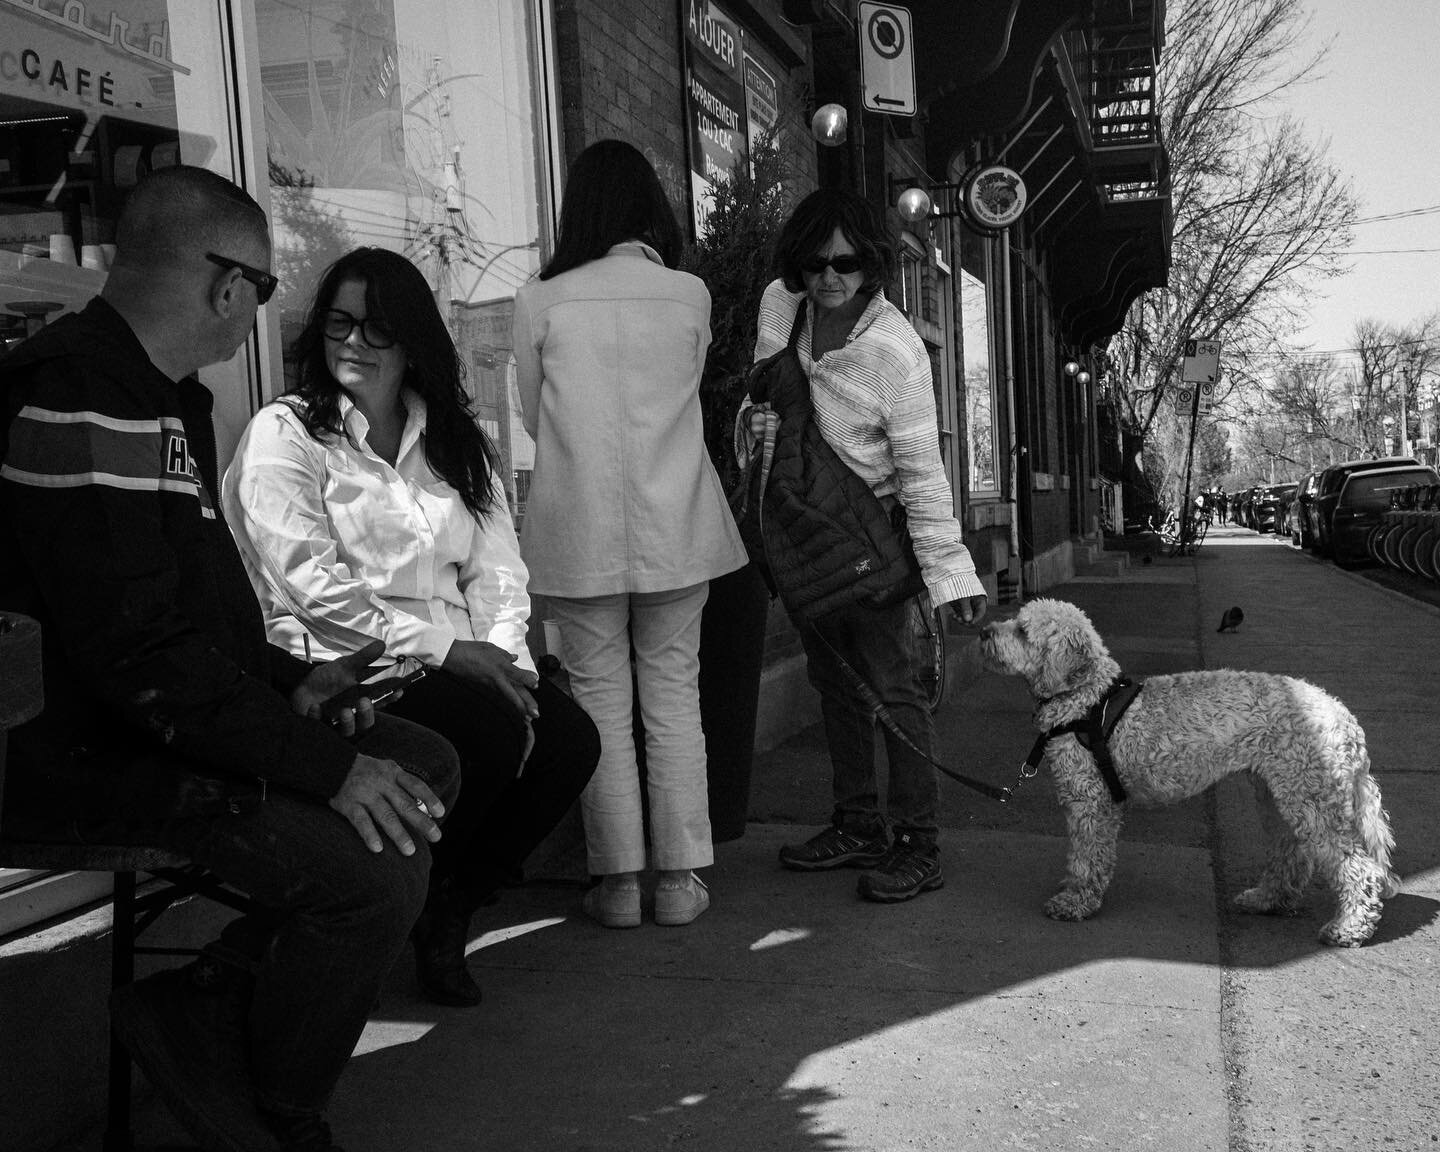 Dog eats (wo)man. #dog #streetphotography #monochrome #blackandwhite #bnwphotography #bnwgang #montreal #mtl #plateaumontroyal #mileend  #igers #igerscanada #thismtl #igersmontreal #mtl_unscripted #streetlifeshow #fujiX100v